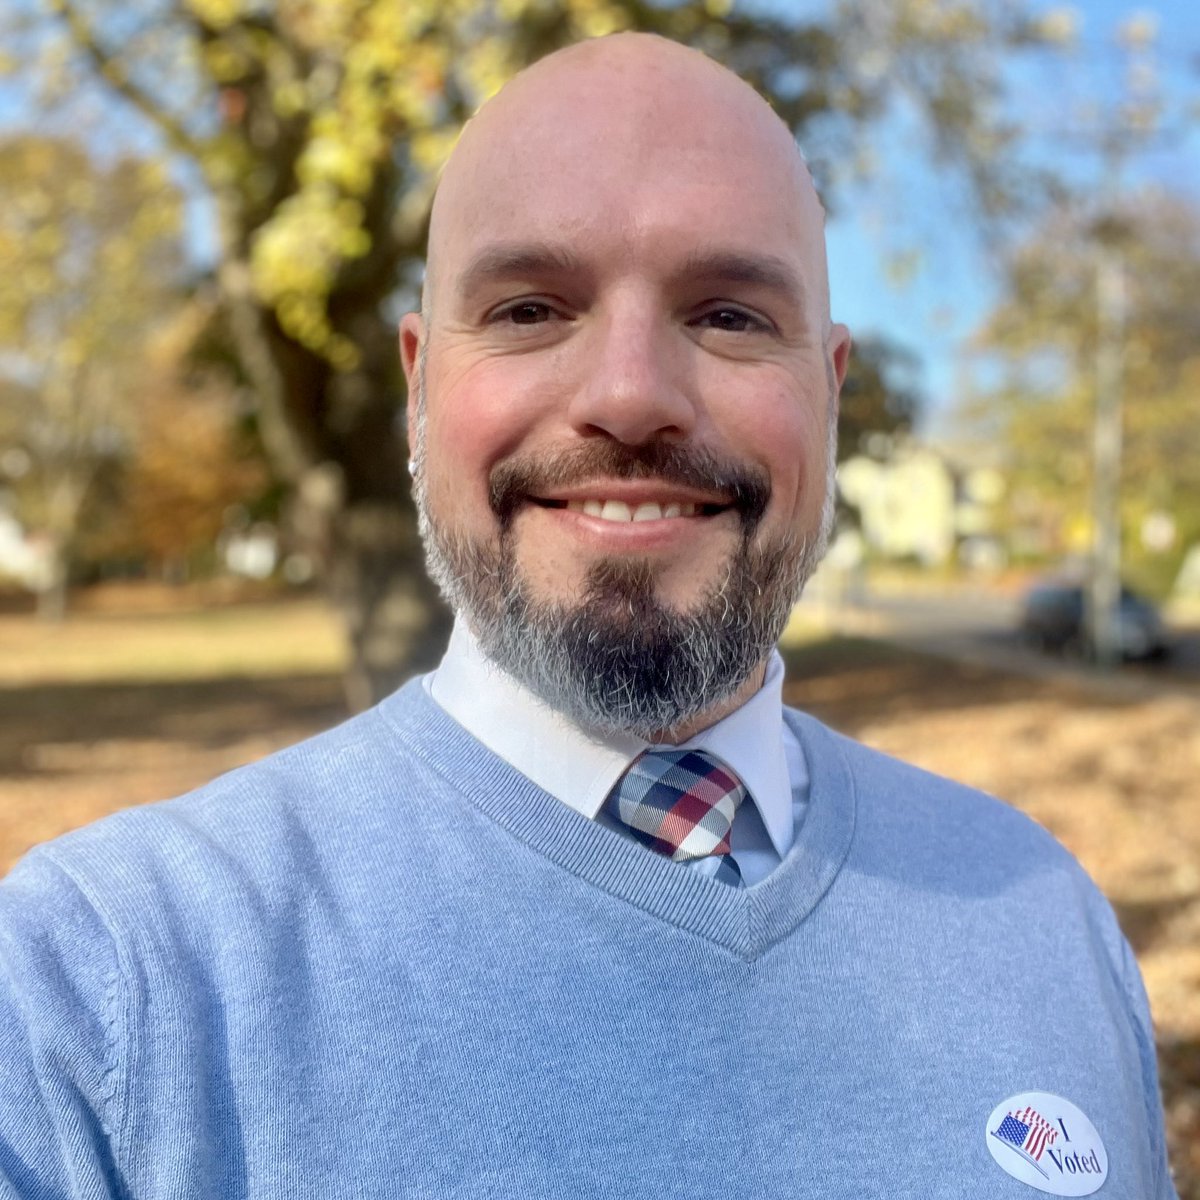 This afternoon reminder from @JPEUnion member, @Mansfield_CT town council candidate @SamuelBruder that 'labor is your neighbor' means leading by example & performing civic duty in #Election2023. #AFTVotes @AFTunion @AFT_PE @AFLCIO @ConnAFLCIO